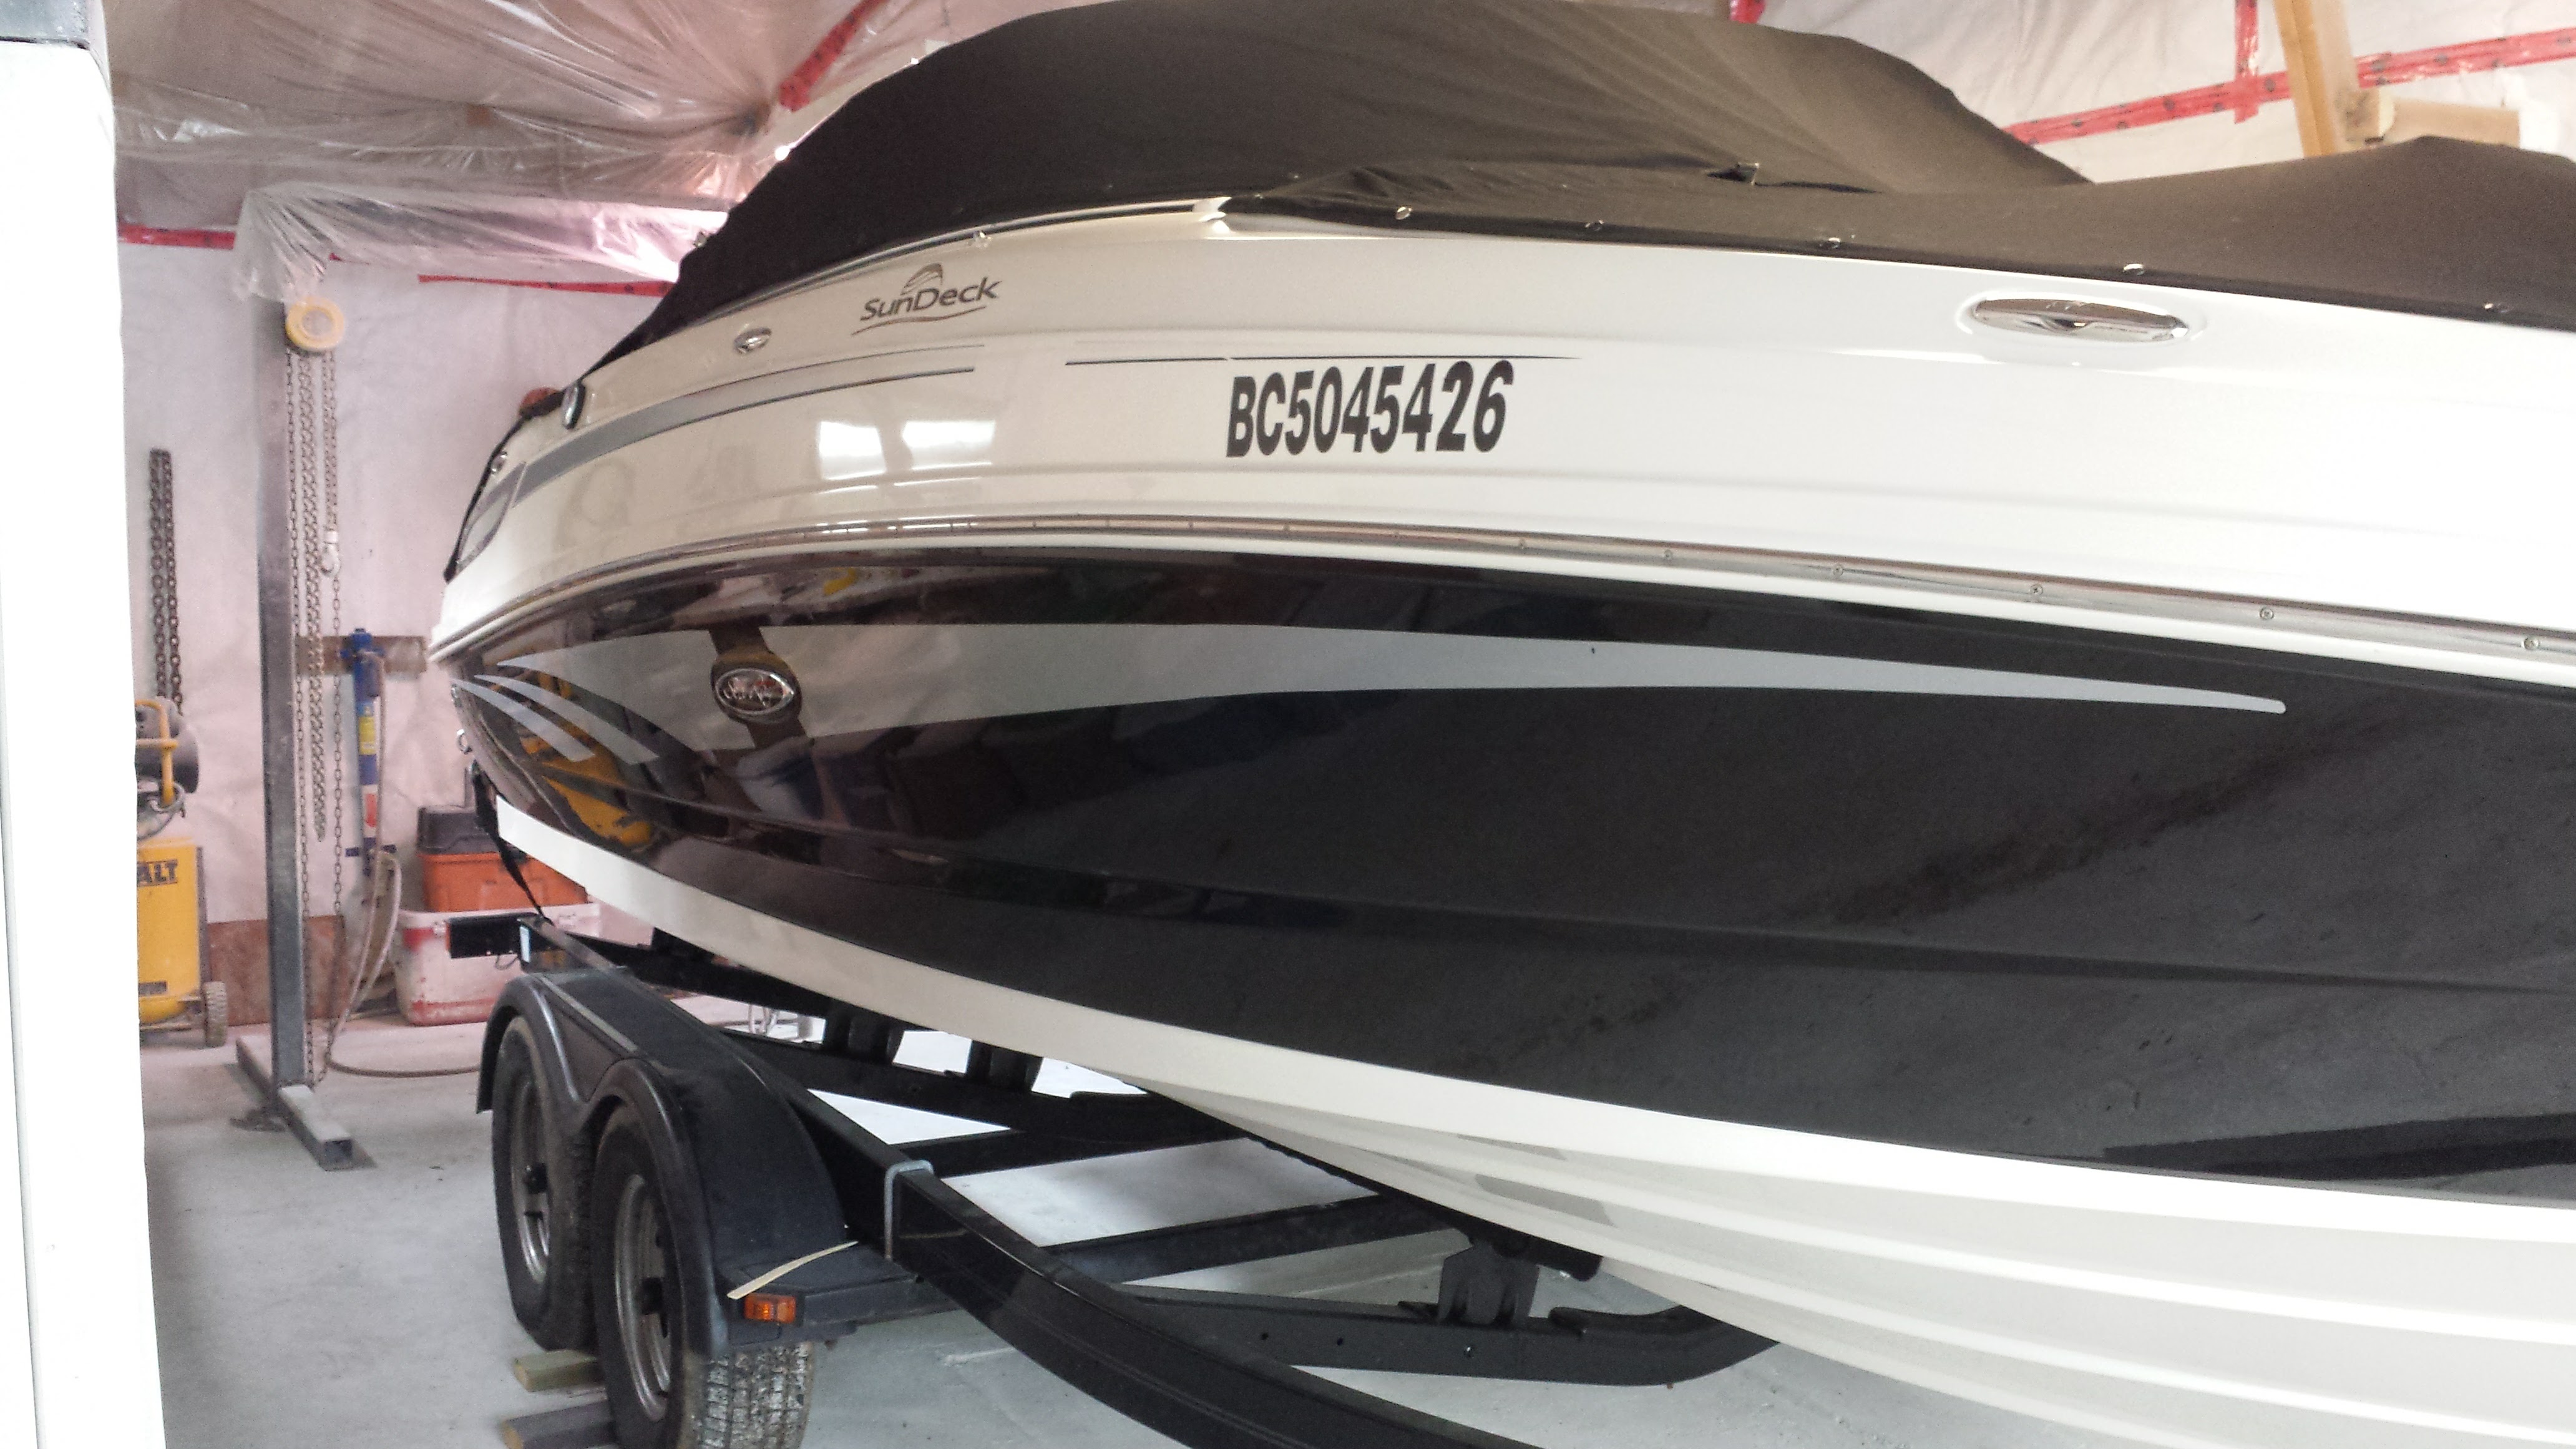 Sea Ray boat maintenance and repairs from MRV Marine Services.